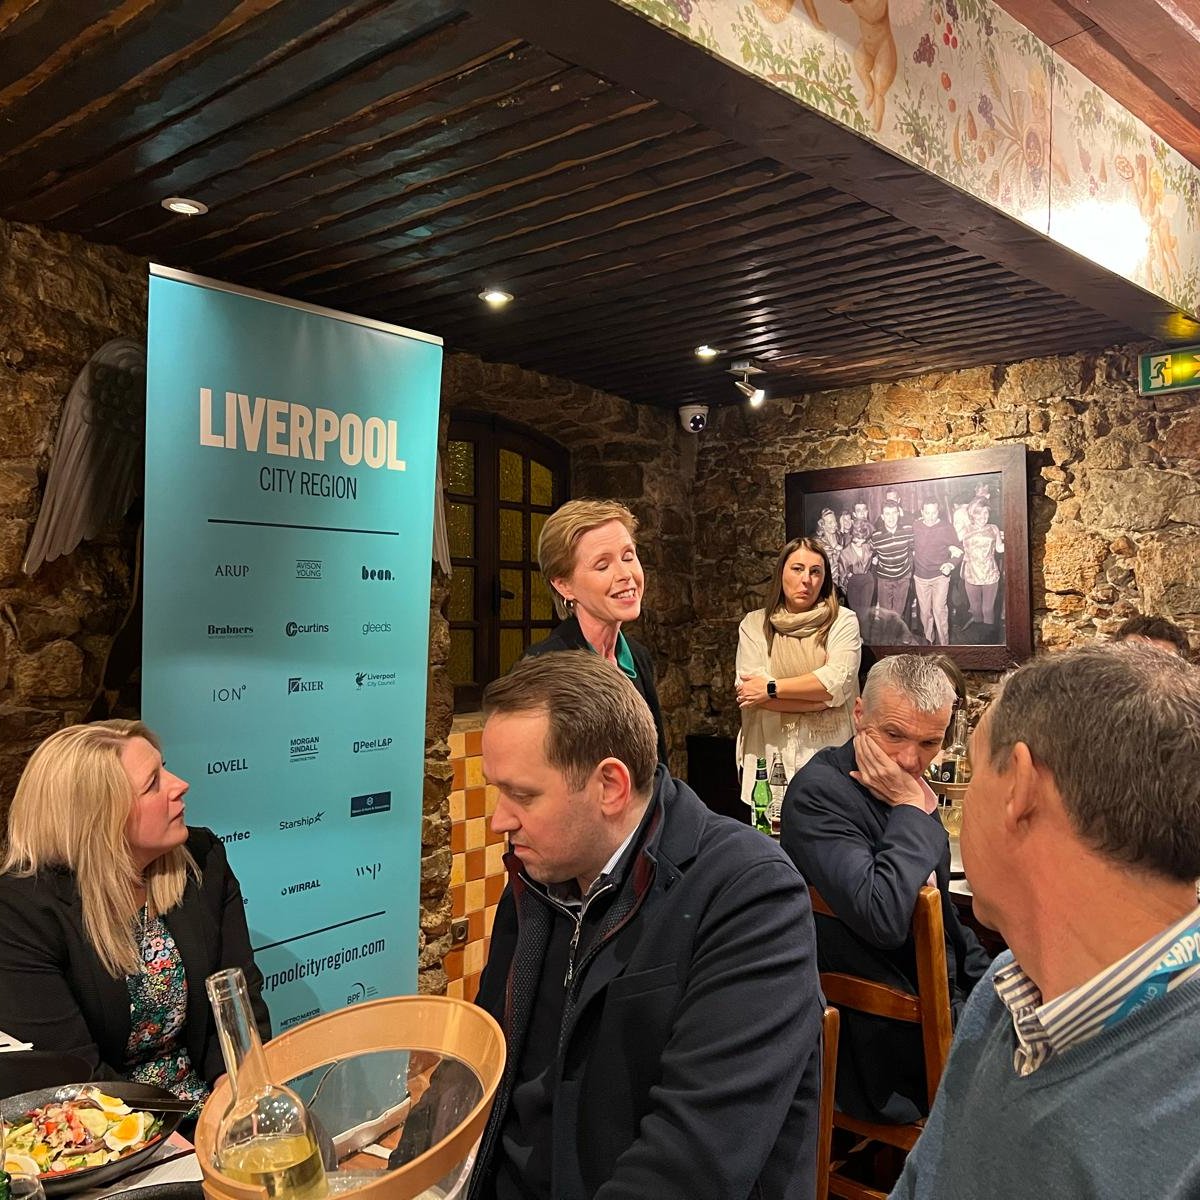 Last week's #MIPIM24 was a fantastic opportunity to meet with the change makers of the regions we work in as well as a chance to reflect on the key issues our industry faces. There are a few themes from the conference we wanted to weigh in on.